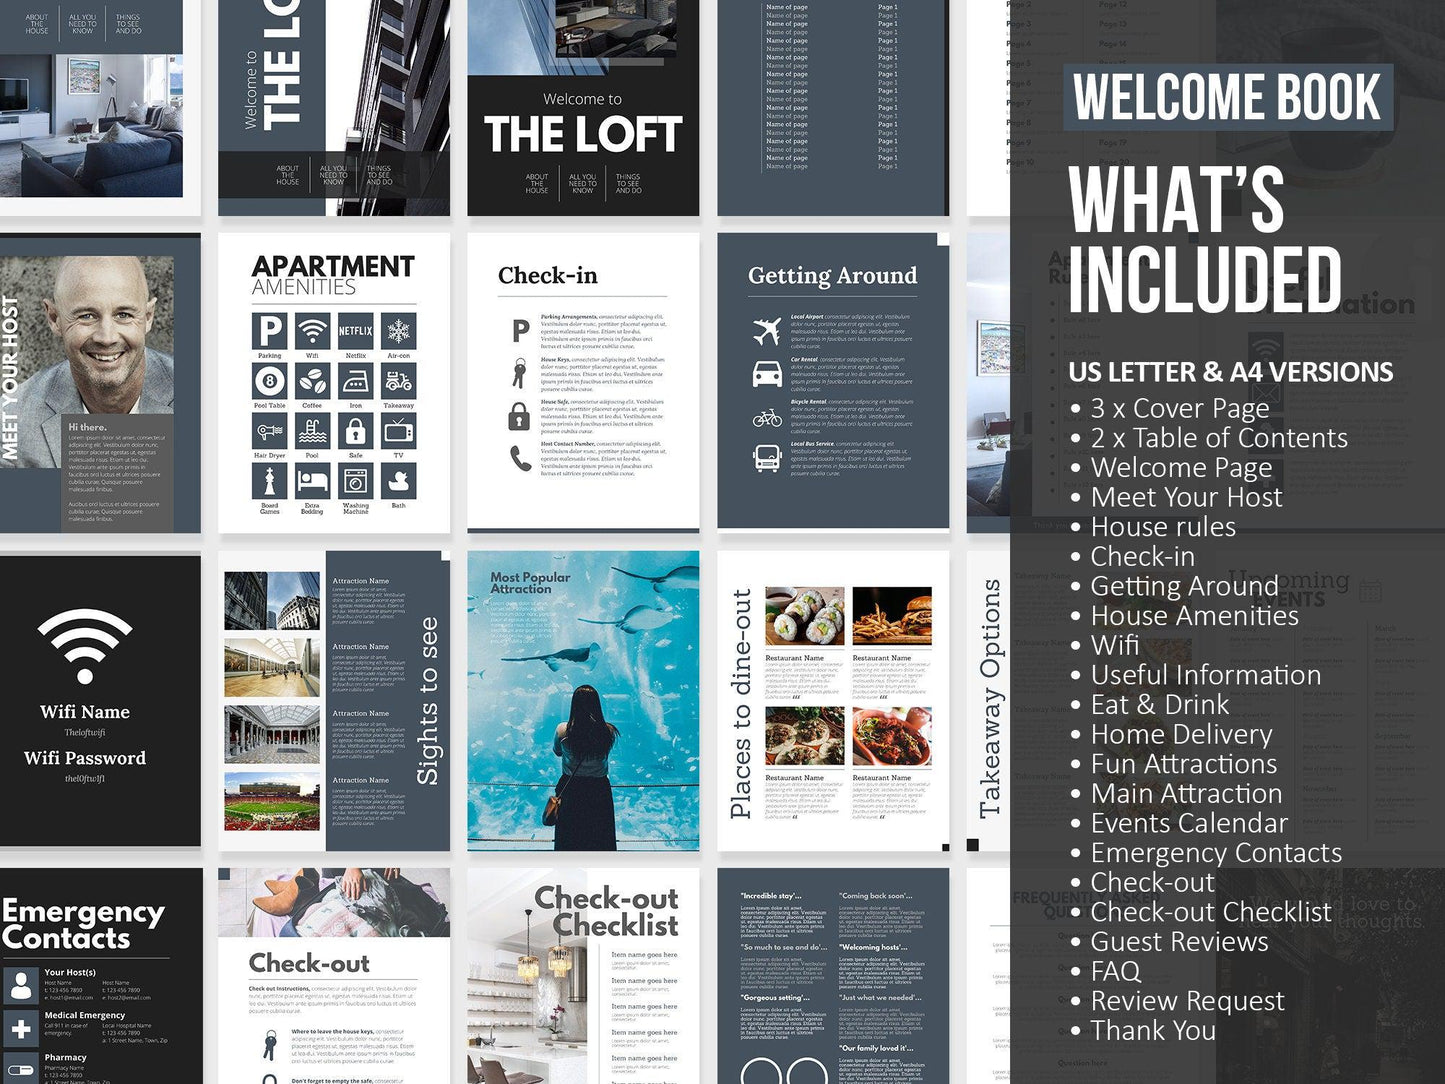 100+ Ultimate Airbnb Host Marketing Template Bundle (city)